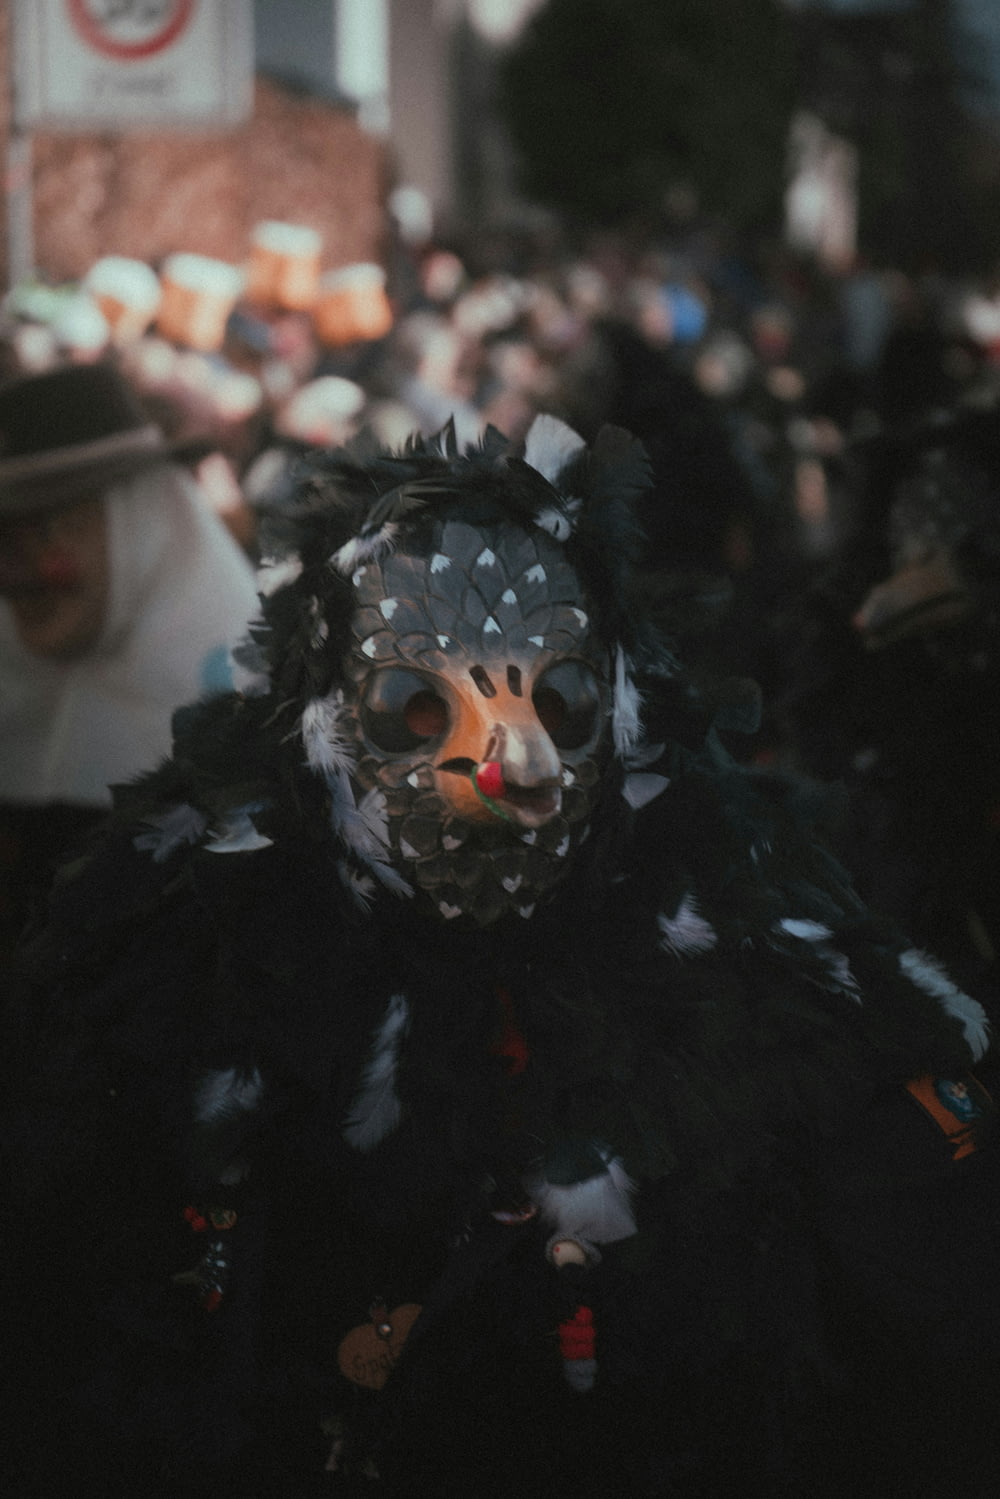 a person wearing a mask with feathers on it